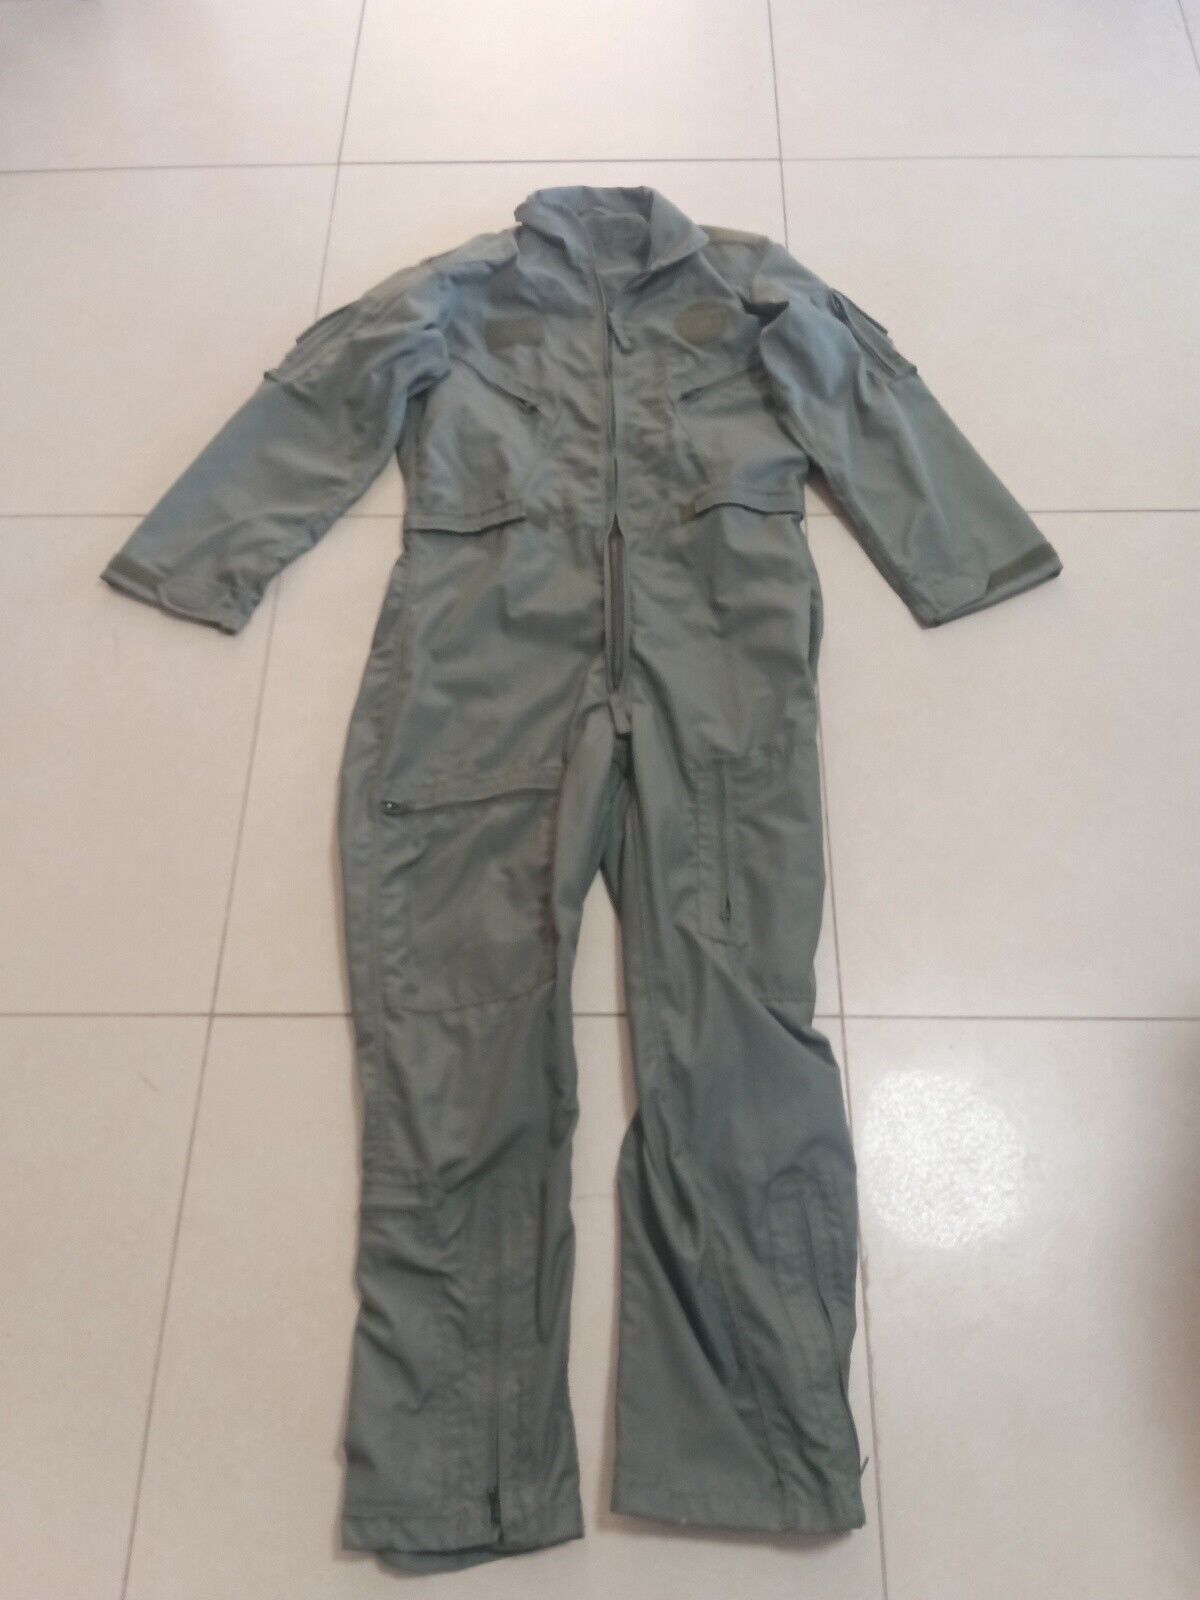 IDF IAF Israeli Air Force MILITARY FLIGHT PILOT Suit COVERALL With Insignia🔥🔥